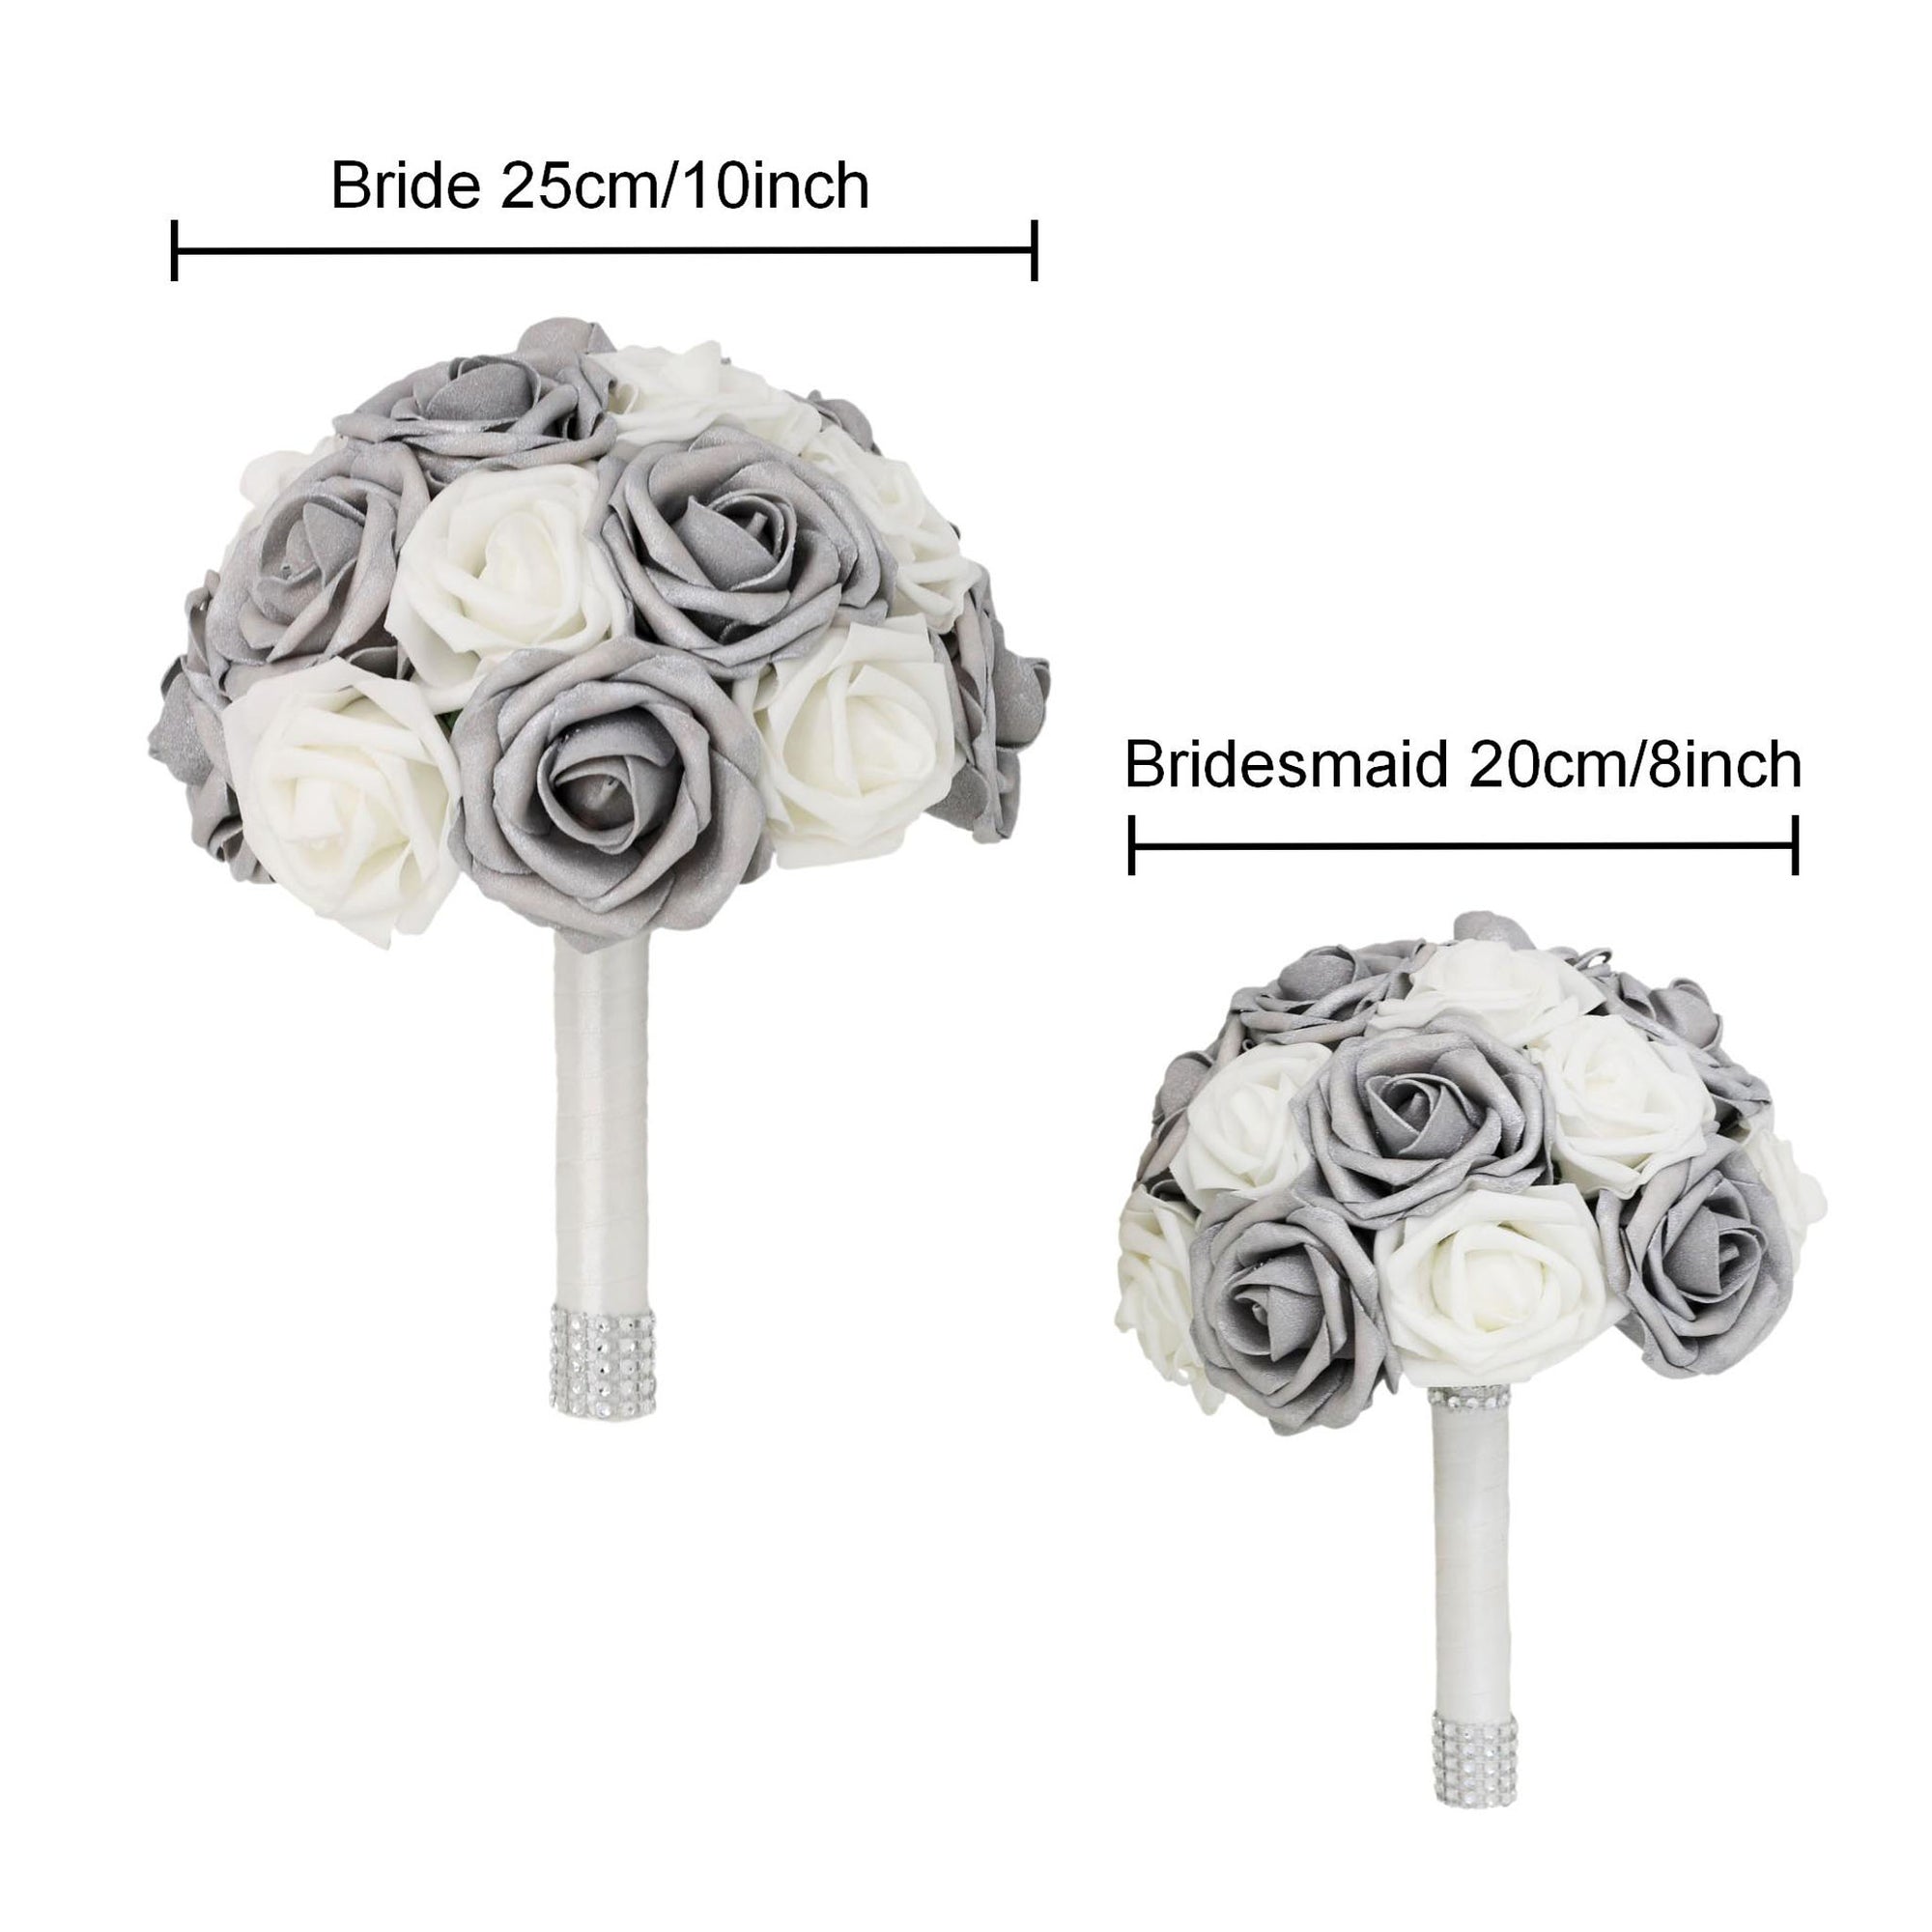 Silver White Bridal Flowers Wedding Bouquet of Roses Bride Bridesmaid